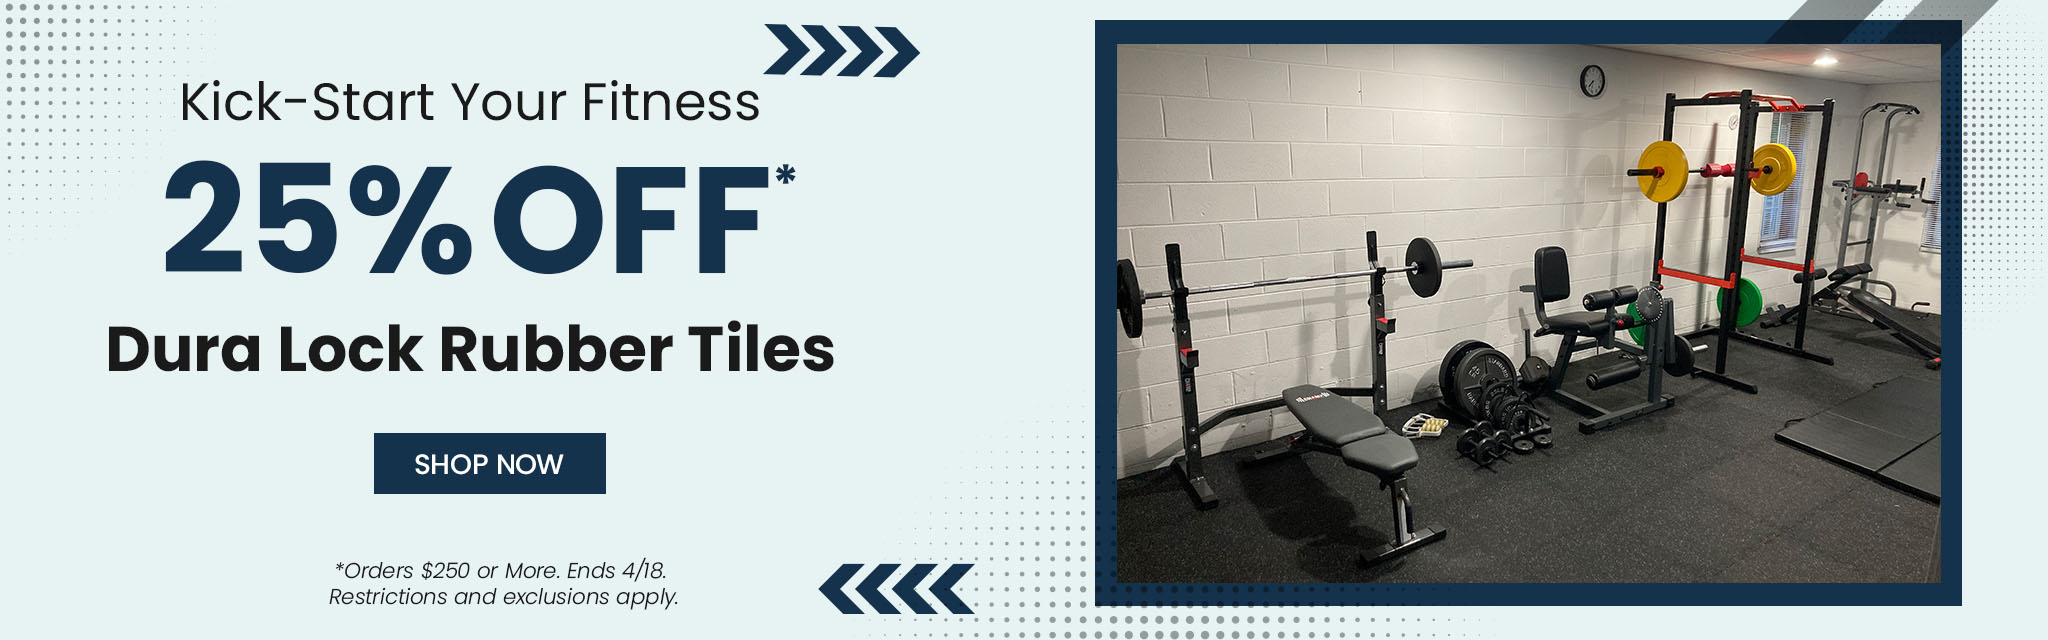 Kick-Start your Fitness. 25% Off Dura Lock Rubber Tiles. Shop Now. Orders $250 or More. Ends April 18th. Restrictions apply